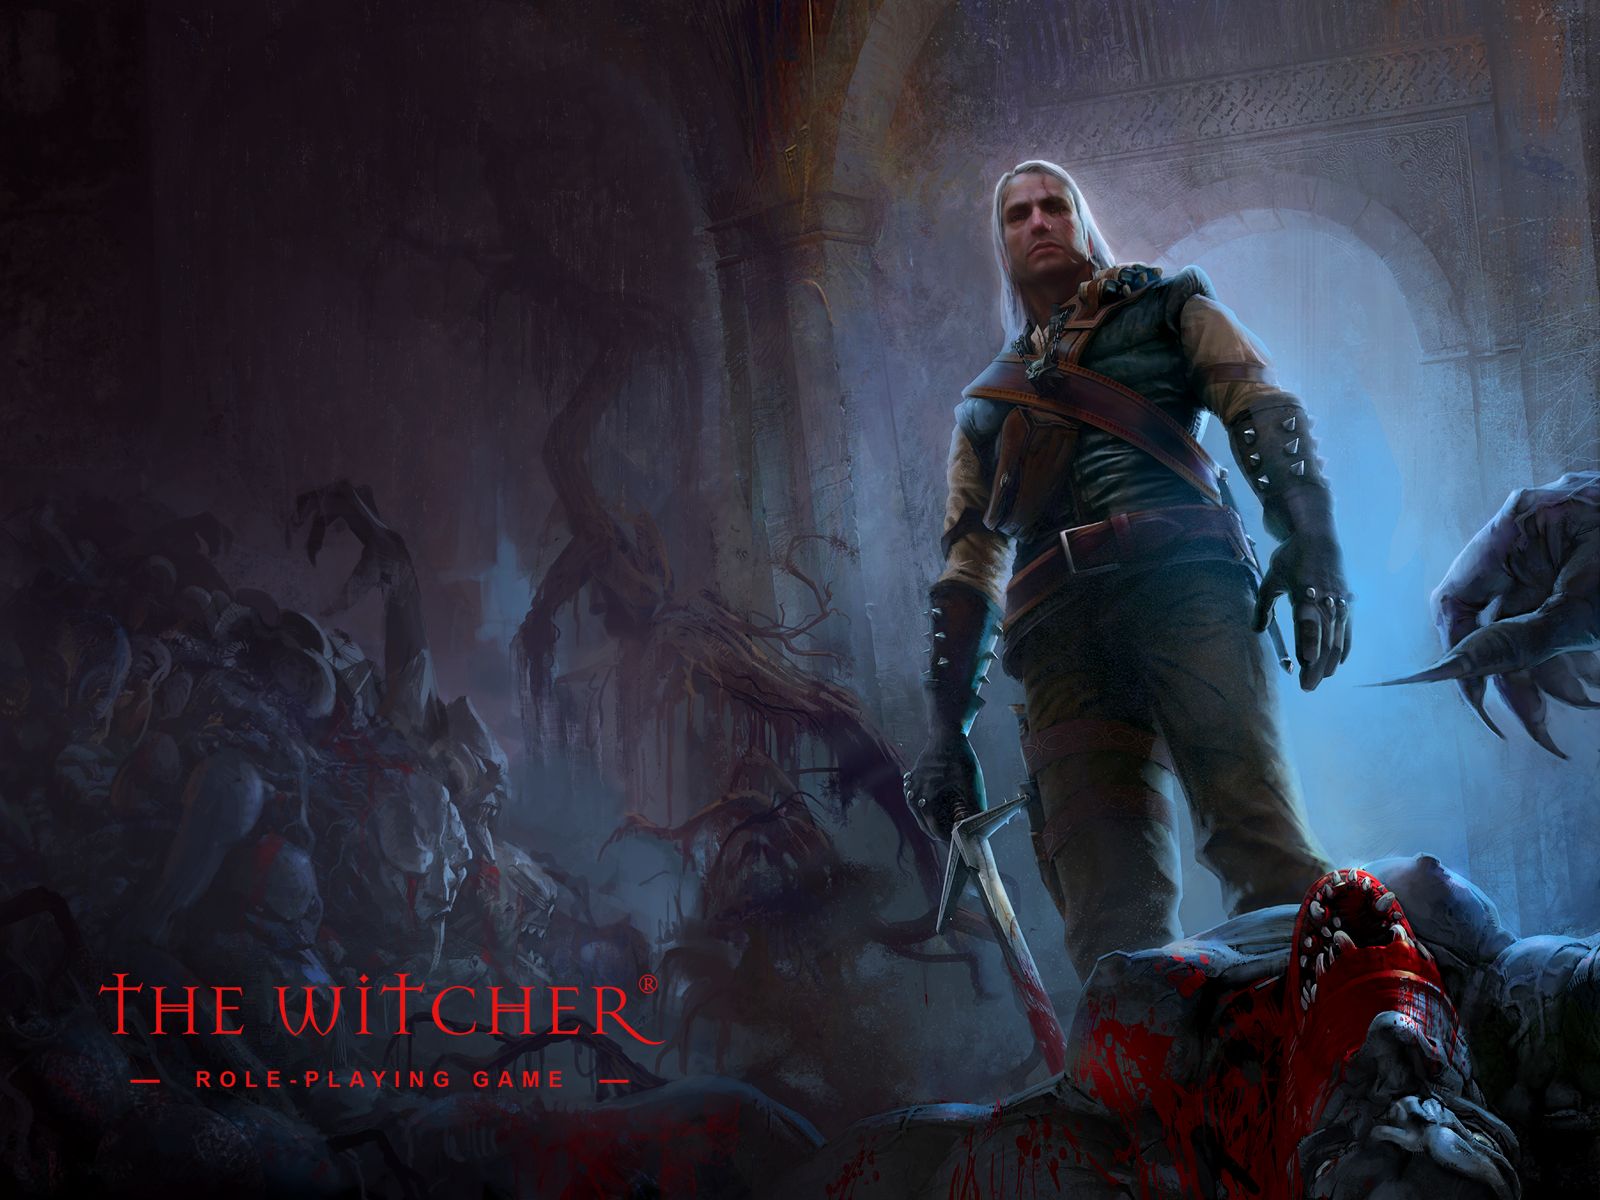 Download HQ The Witcher wallpaper / Games / 1600x1200